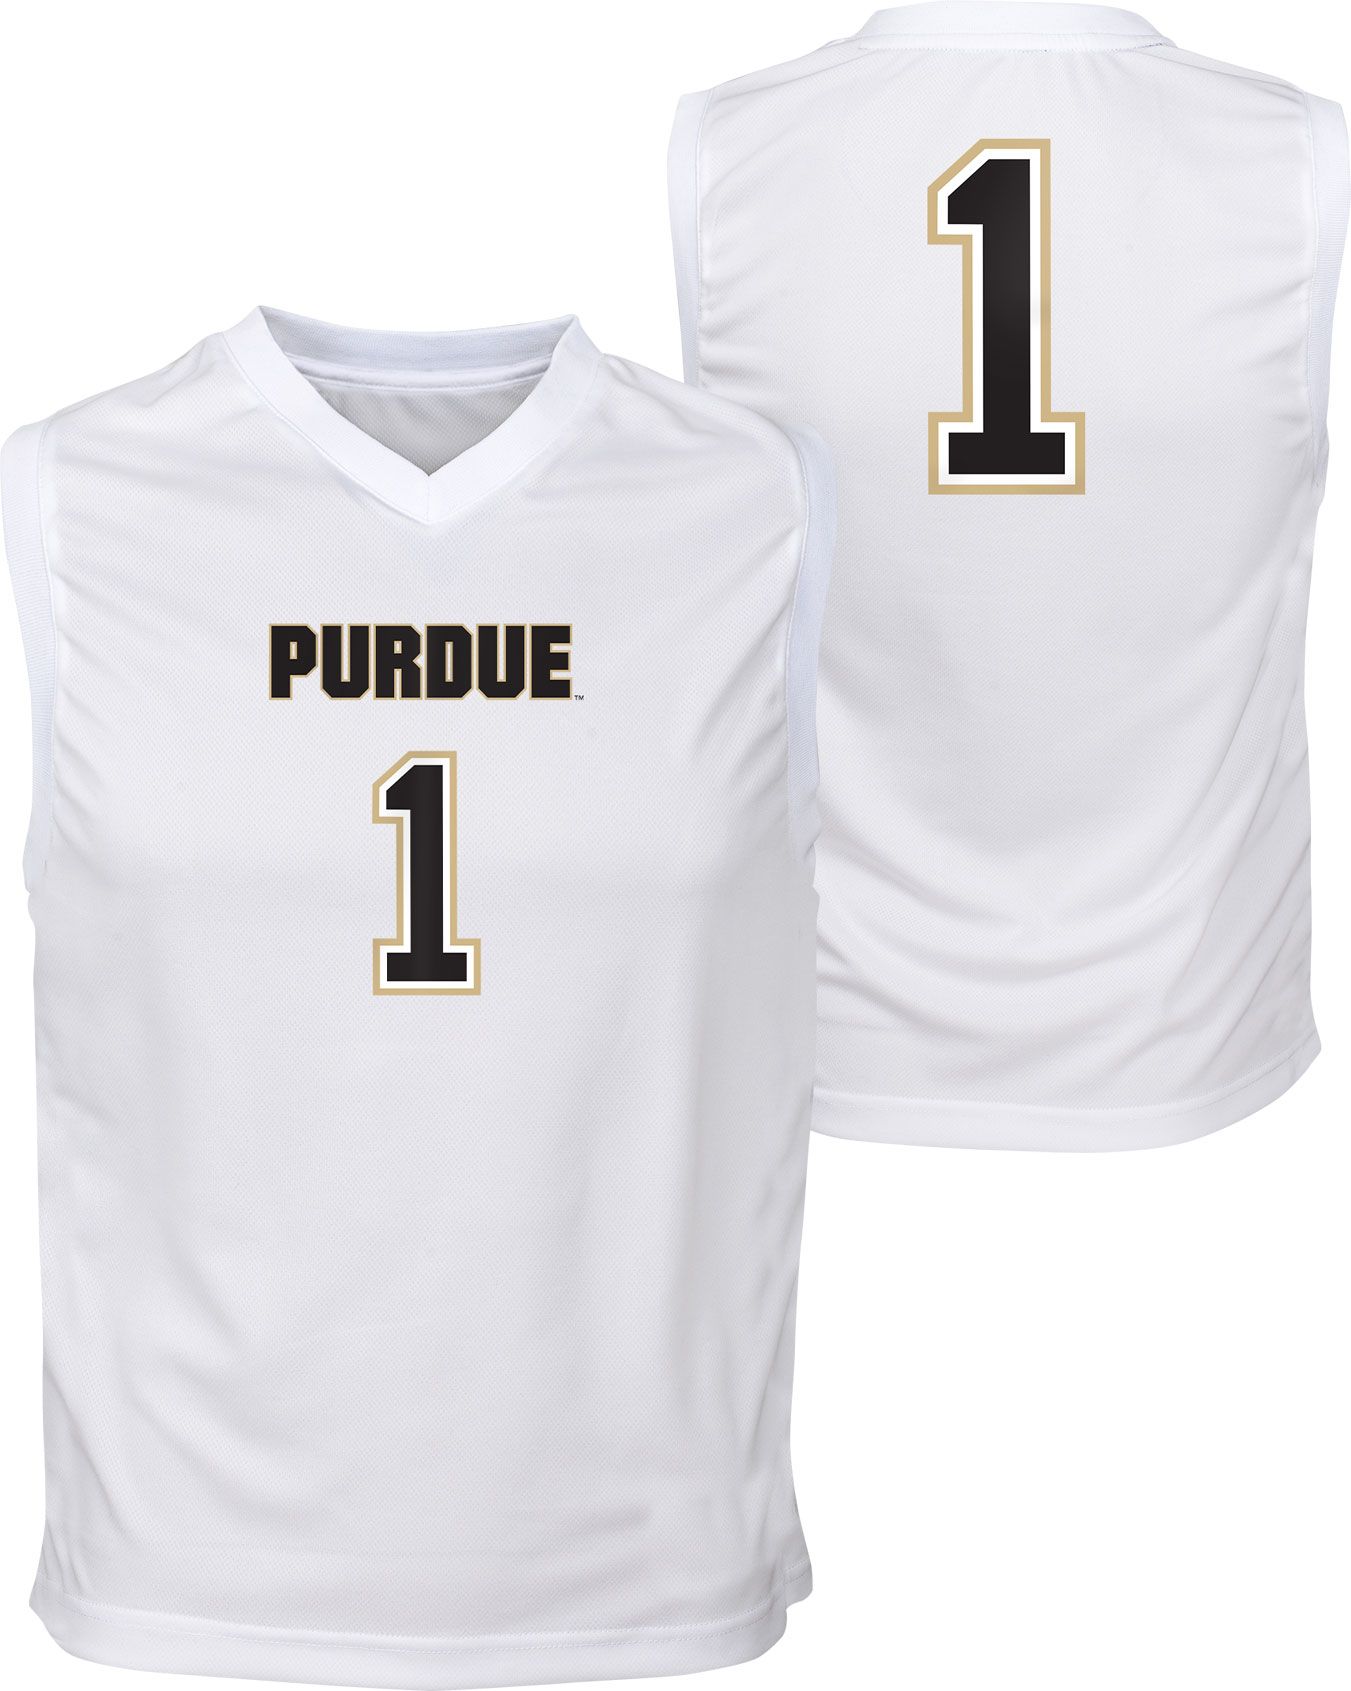 Purdue Boilermakers retired football player jersey